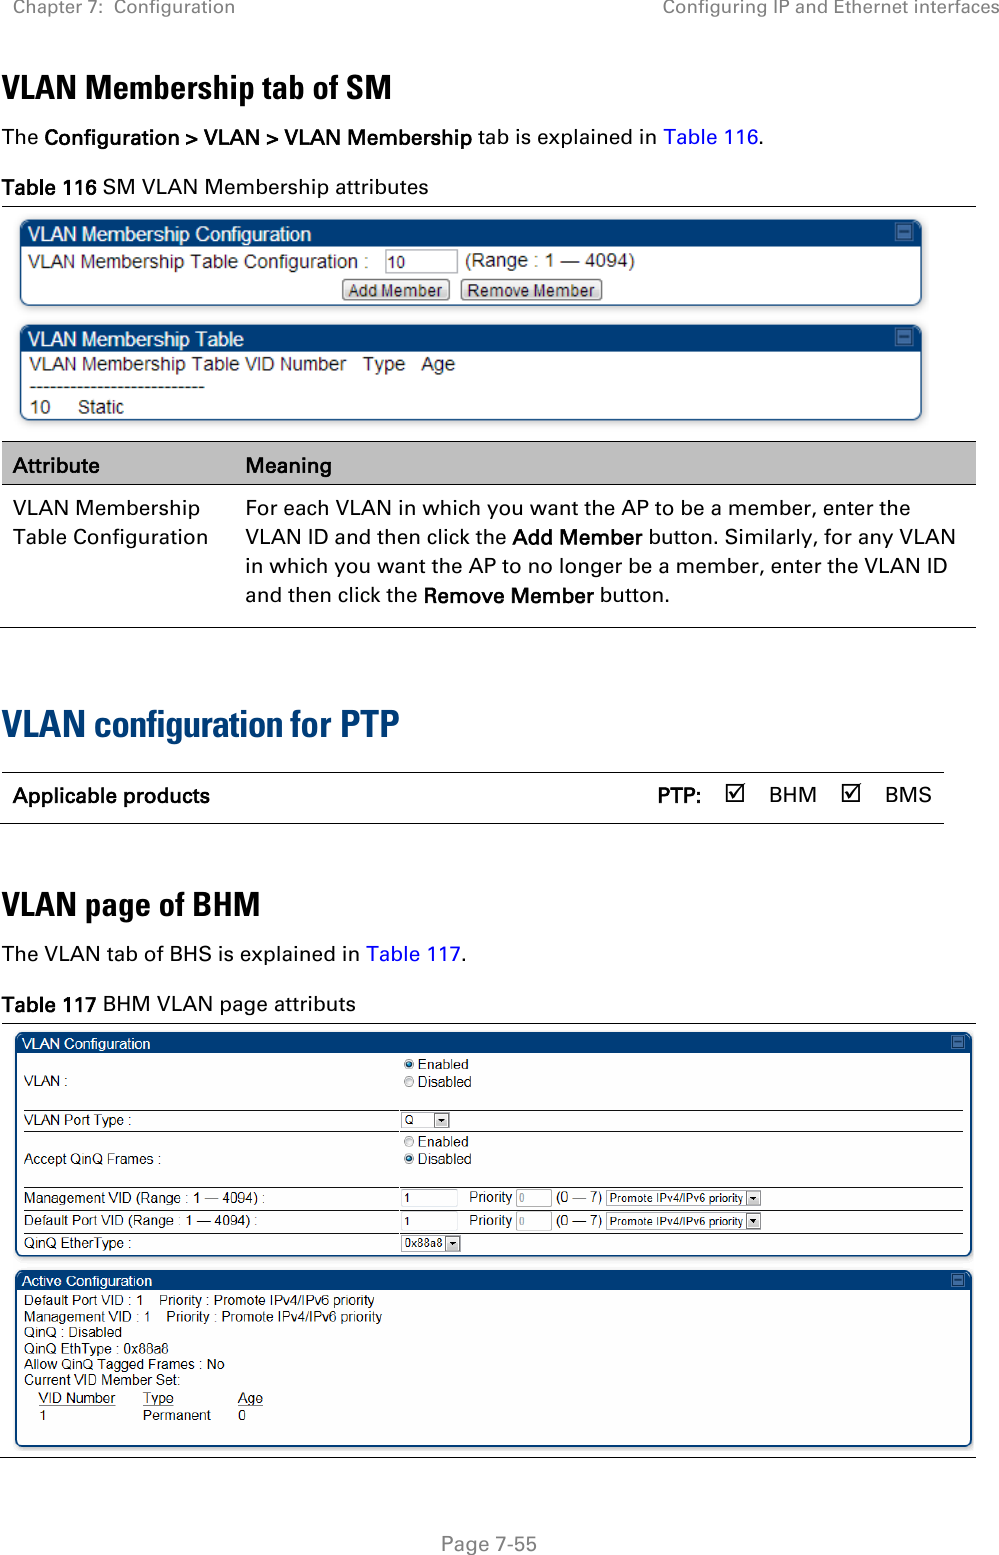 Chapter 7:  Configuration Configuring IP and Ethernet interfaces   Page 7-55 VLAN Membership tab of SM The Configuration &gt; VLAN &gt; VLAN Membership tab is explained in Table 116. Table 116 SM VLAN Membership attributes  Attribute Meaning VLAN Membership Table Configuration For each VLAN in which you want the AP to be a member, enter the VLAN ID and then click the Add Member button. Similarly, for any VLAN in which you want the AP to no longer be a member, enter the VLAN ID and then click the Remove Member button.  VLAN configuration for PTP Applicable products      PTP:  BHM  BMS  VLAN page of BHM The VLAN tab of BHS is explained in Table 117. Table 117 BHM VLAN page attributs  